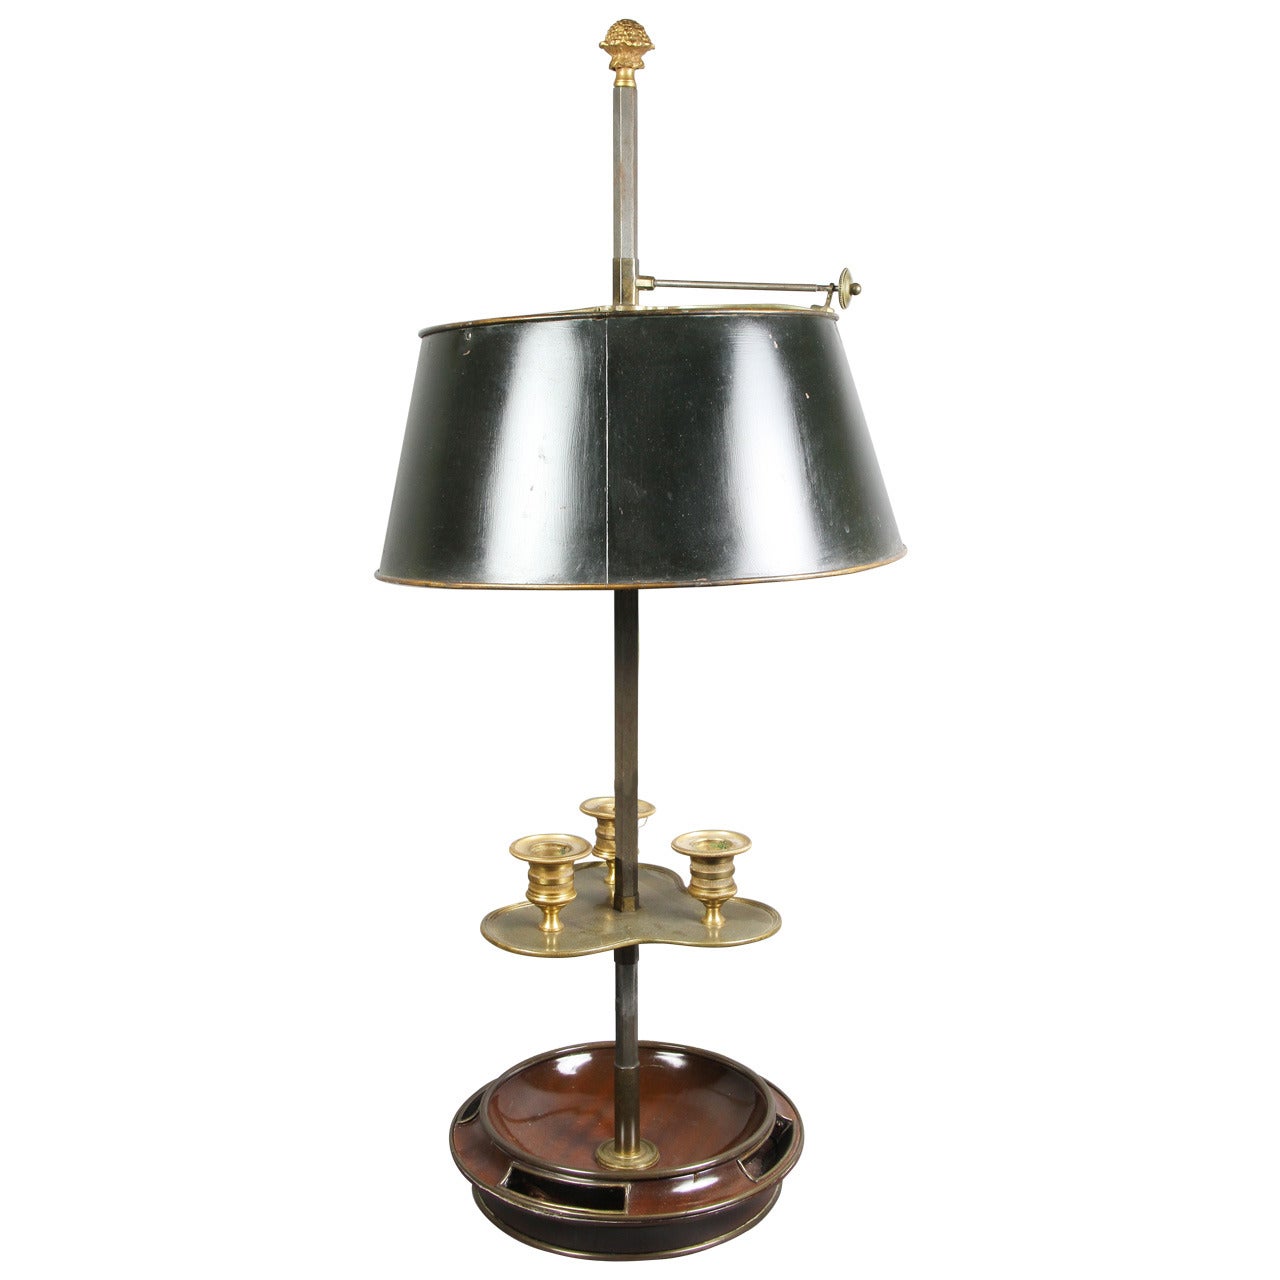 Empire Style Mahogany and Brass Mounted Bouillotte Lamp by Jansen, Paris